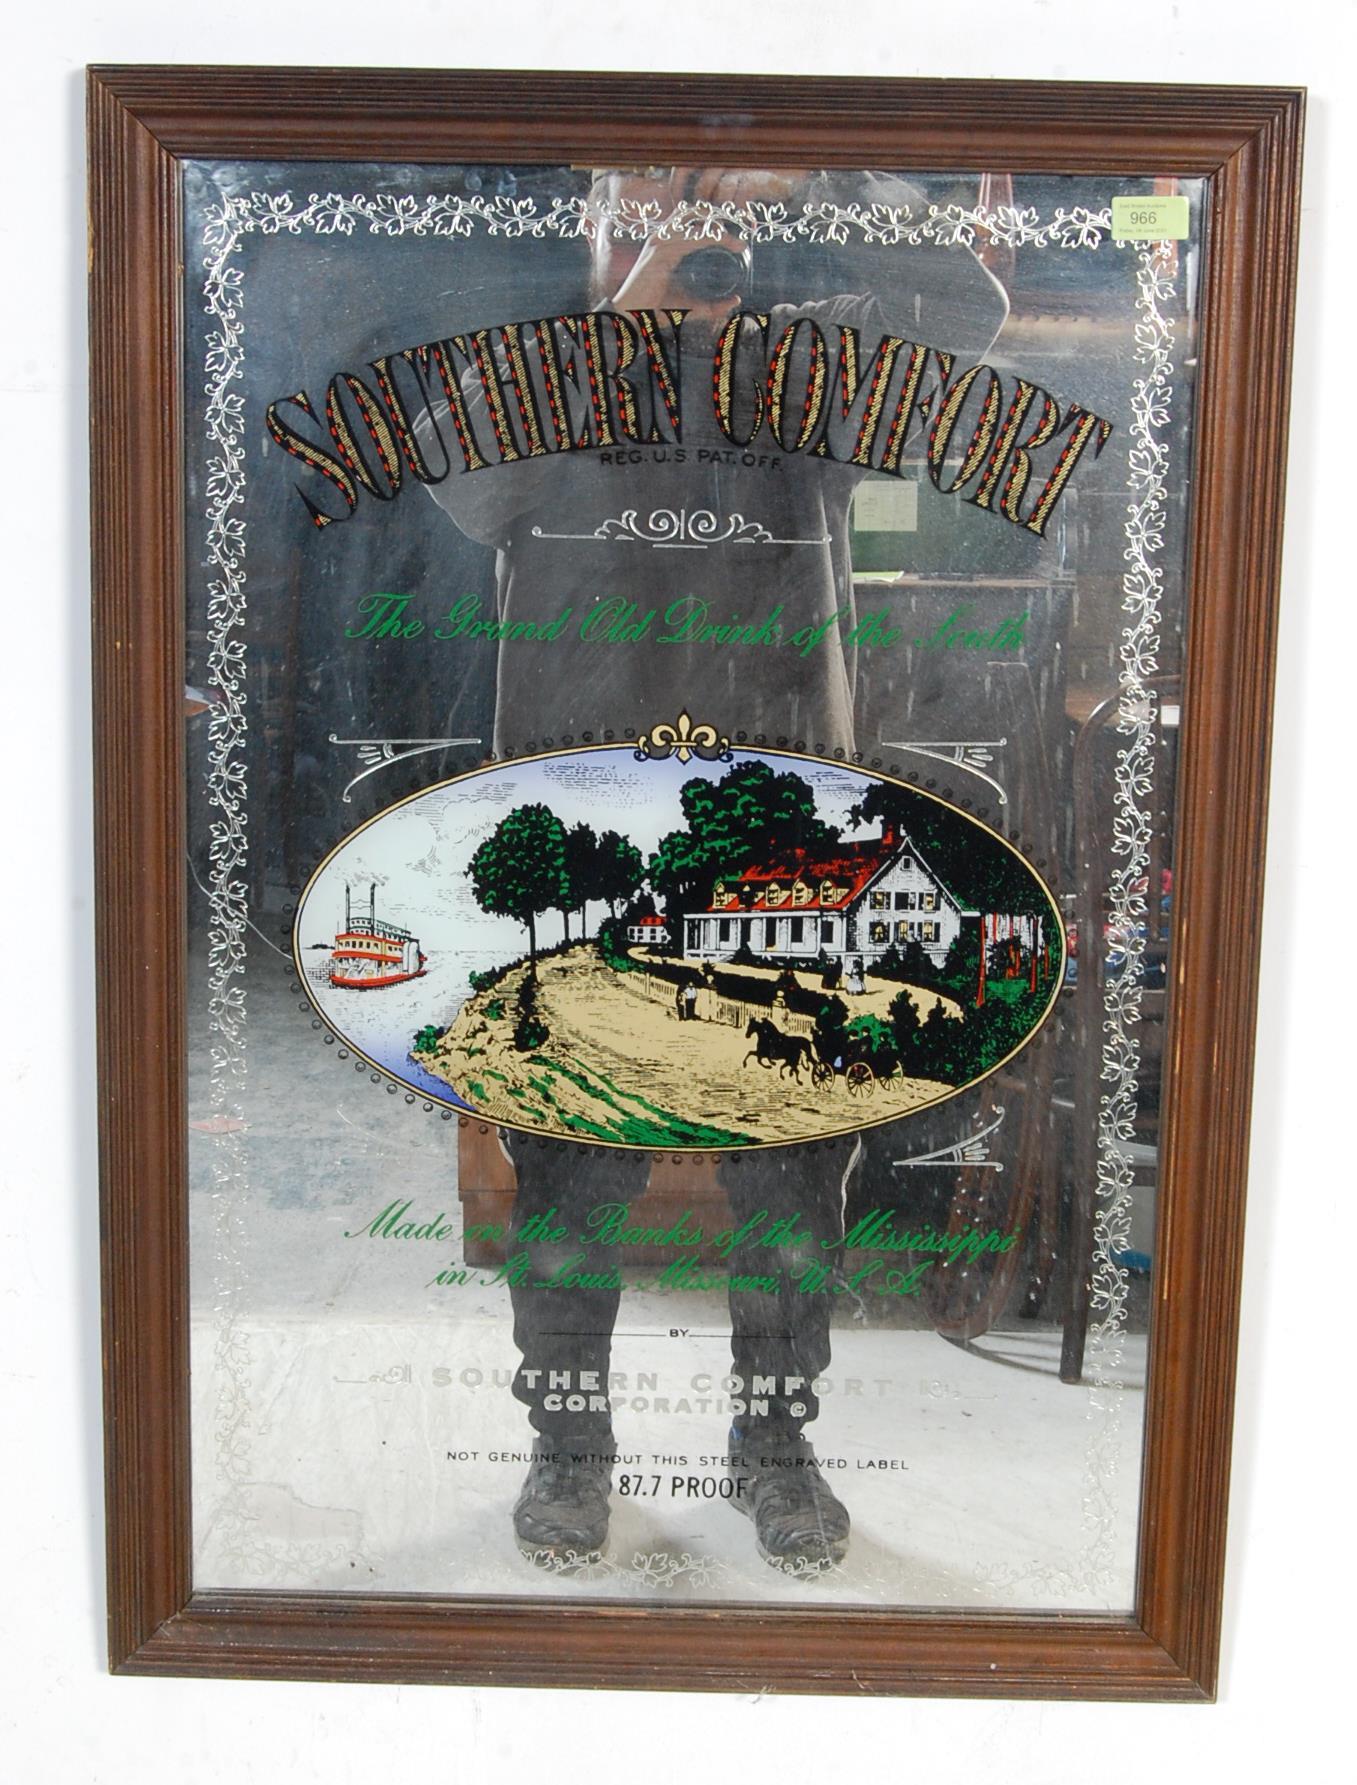 LARGE 20TH CENTURY SOUTHERN COMFORT ADVERTISING MIRROR